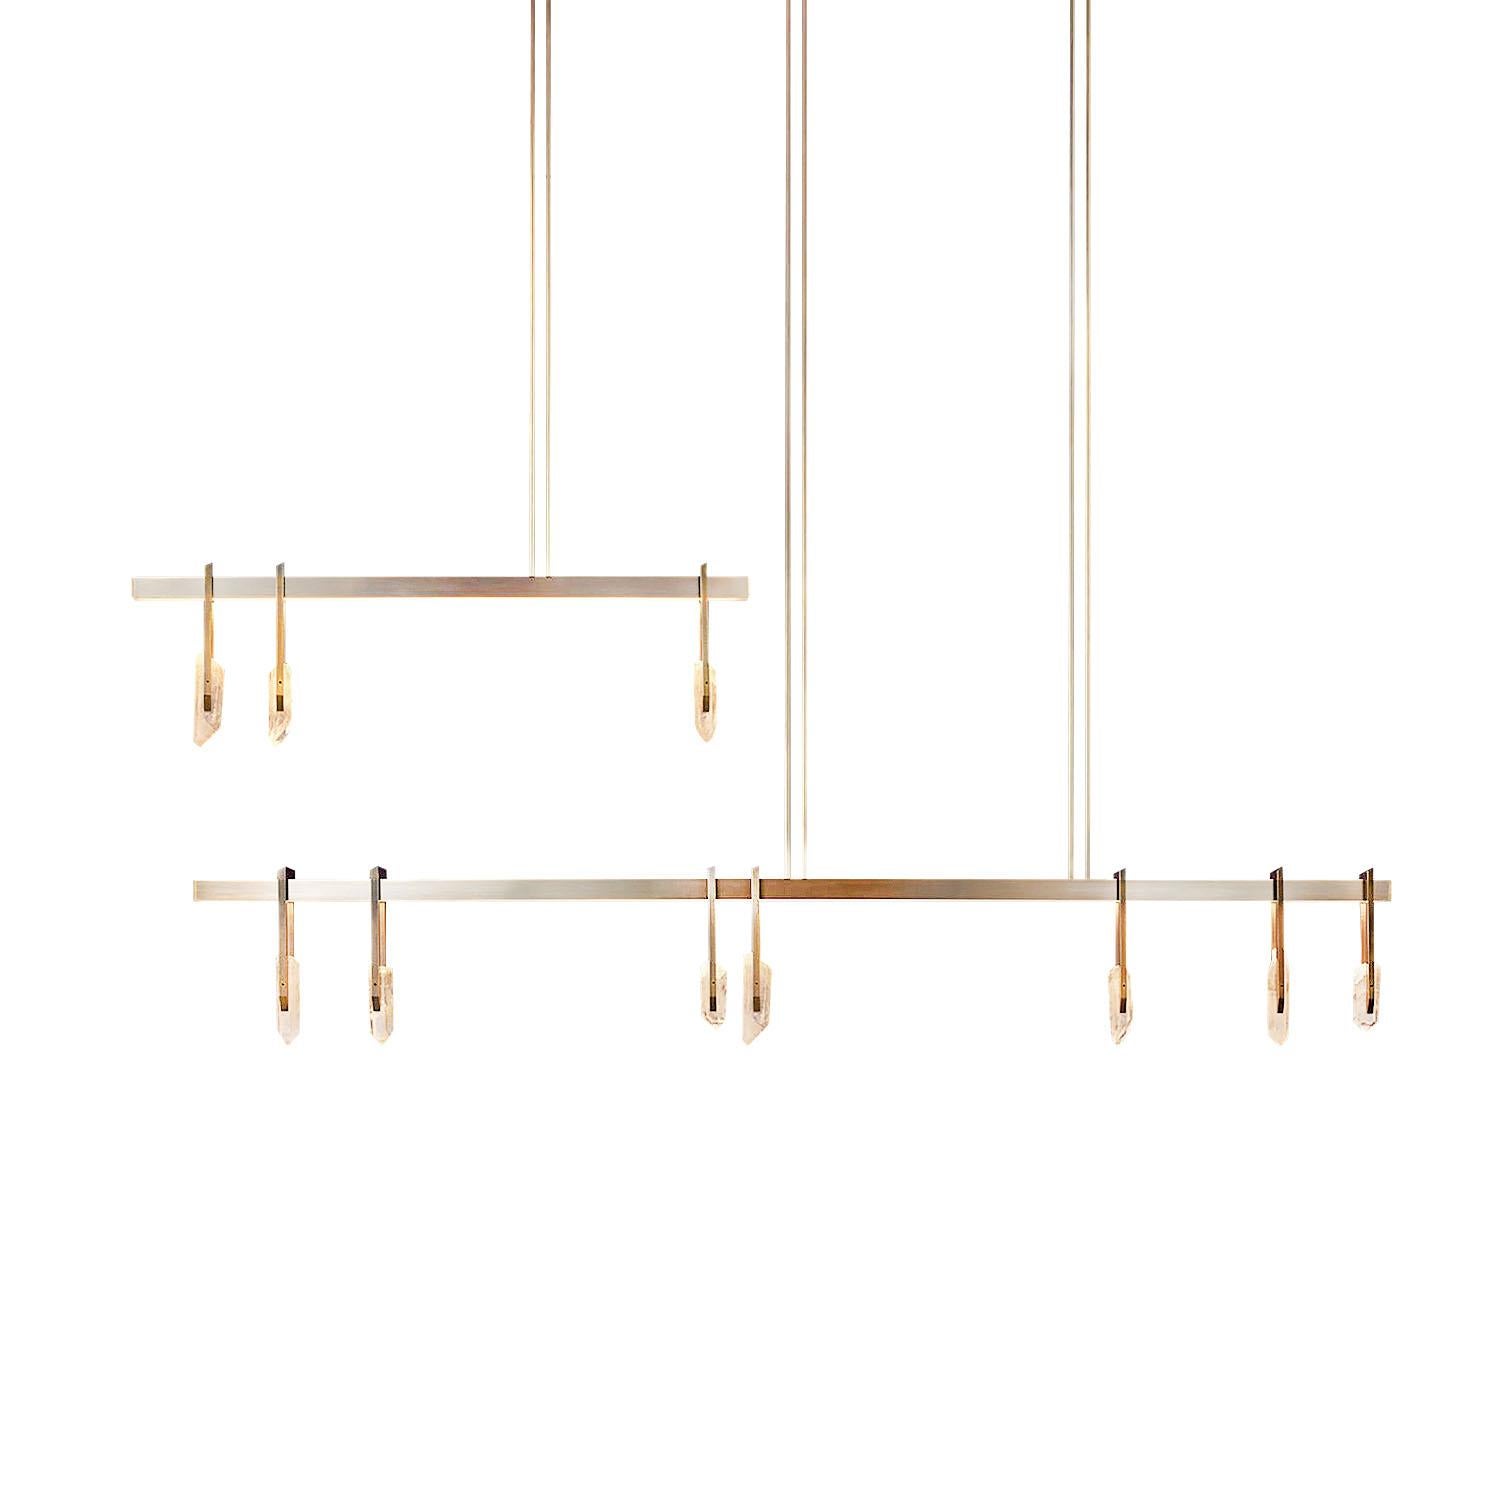 Brass and Quartz Crystal Pendant Light - Abacus 900 by Christopher Boots

The Abacus is a sophisticated tool dating back to 300 BC.
Sliding stones along a rod, ancient statesmen, merchants and mathematicians performed mathematical balancing acts